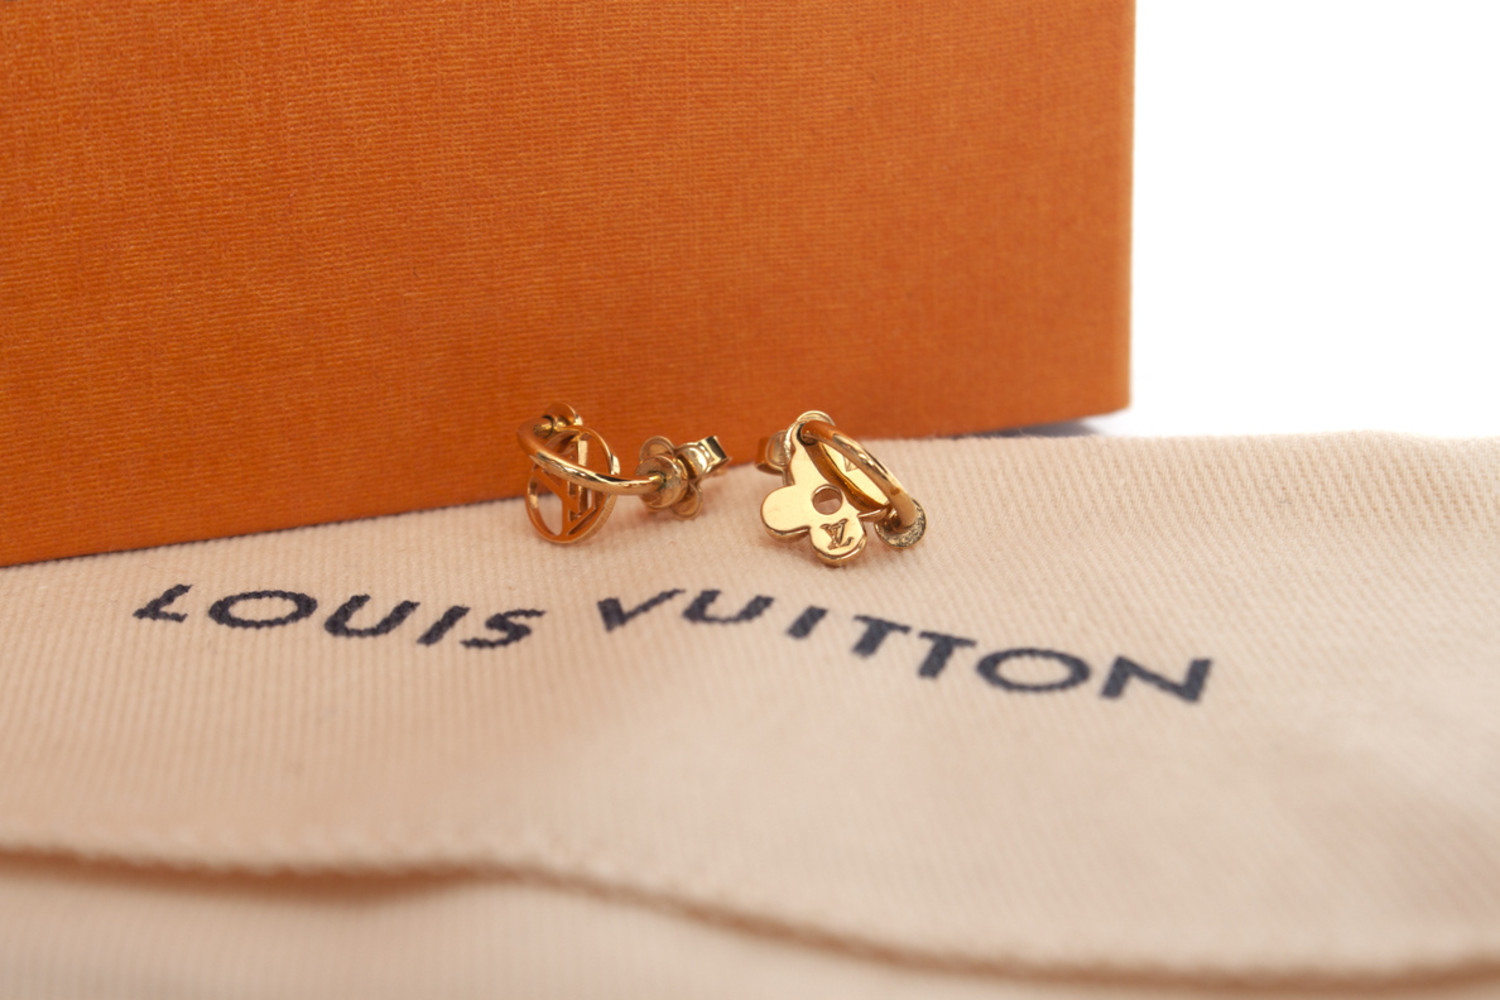 Louis Vuitton A pair of Blooming earrings Marked LV  Bukowskis